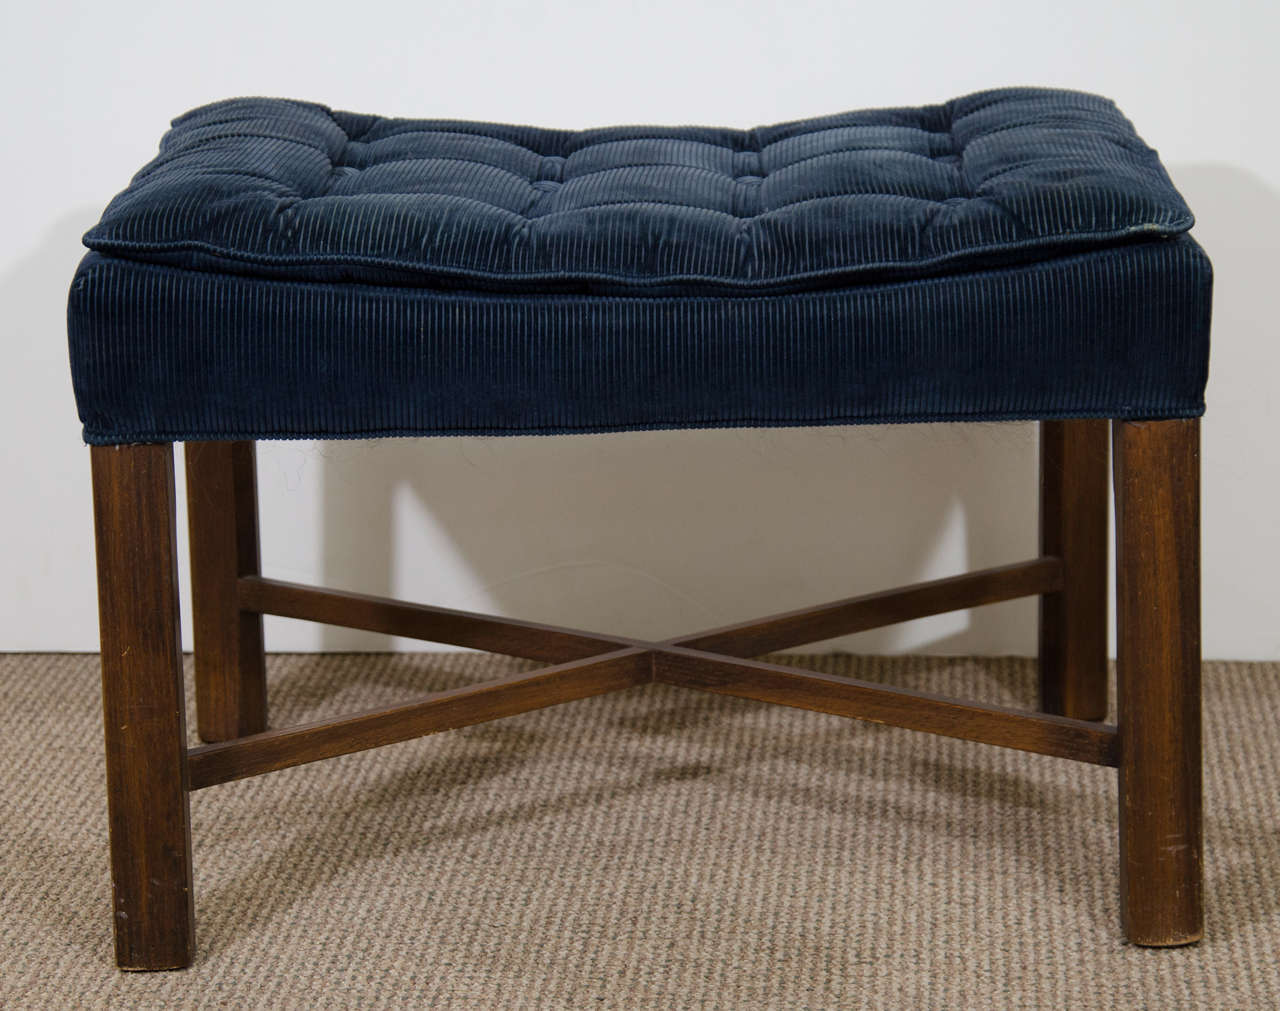 A vintage pair of walnut framed stools with button tufted blue corduroy seats.